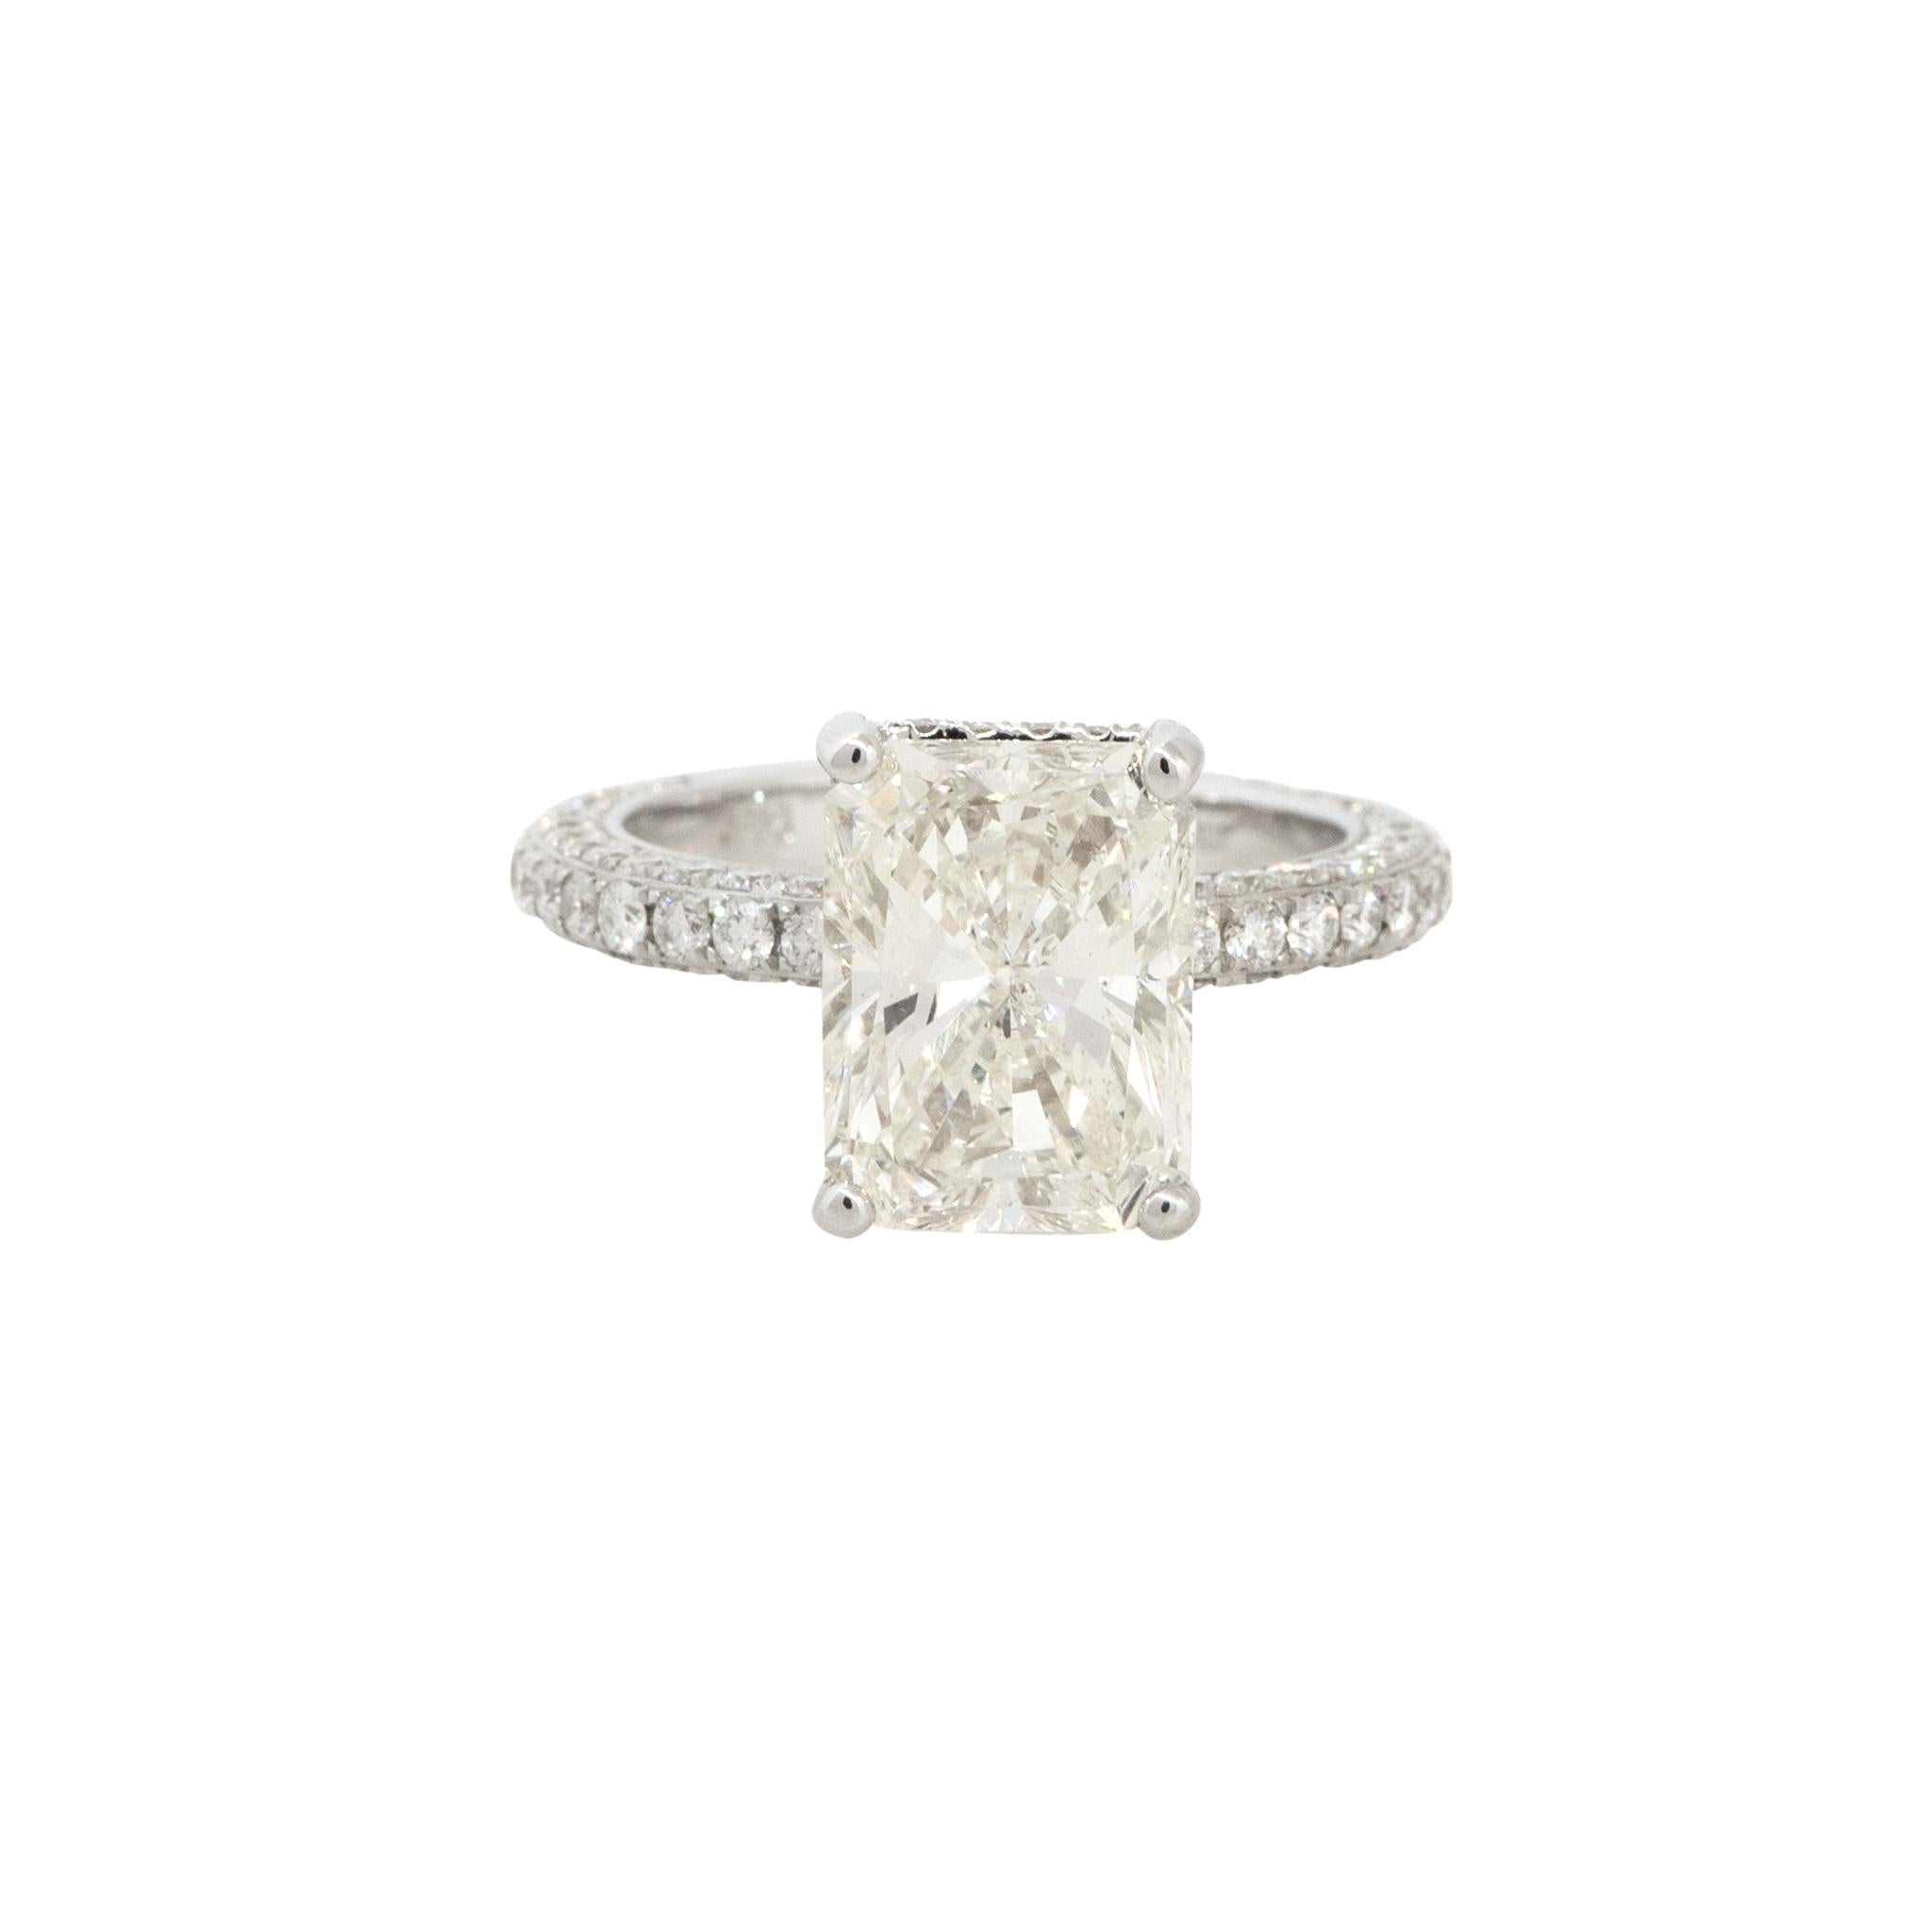 GIA Certified 18k White Gold 5.59ctw Radiant Diamond  Engagement Ring

Raymond Lee Jewelers in Boca Raton -- South Florida’s destination for diamonds, fine jewelry, antique jewelry, estate pieces, and vintage jewels.

Style: Women's 4 Prong